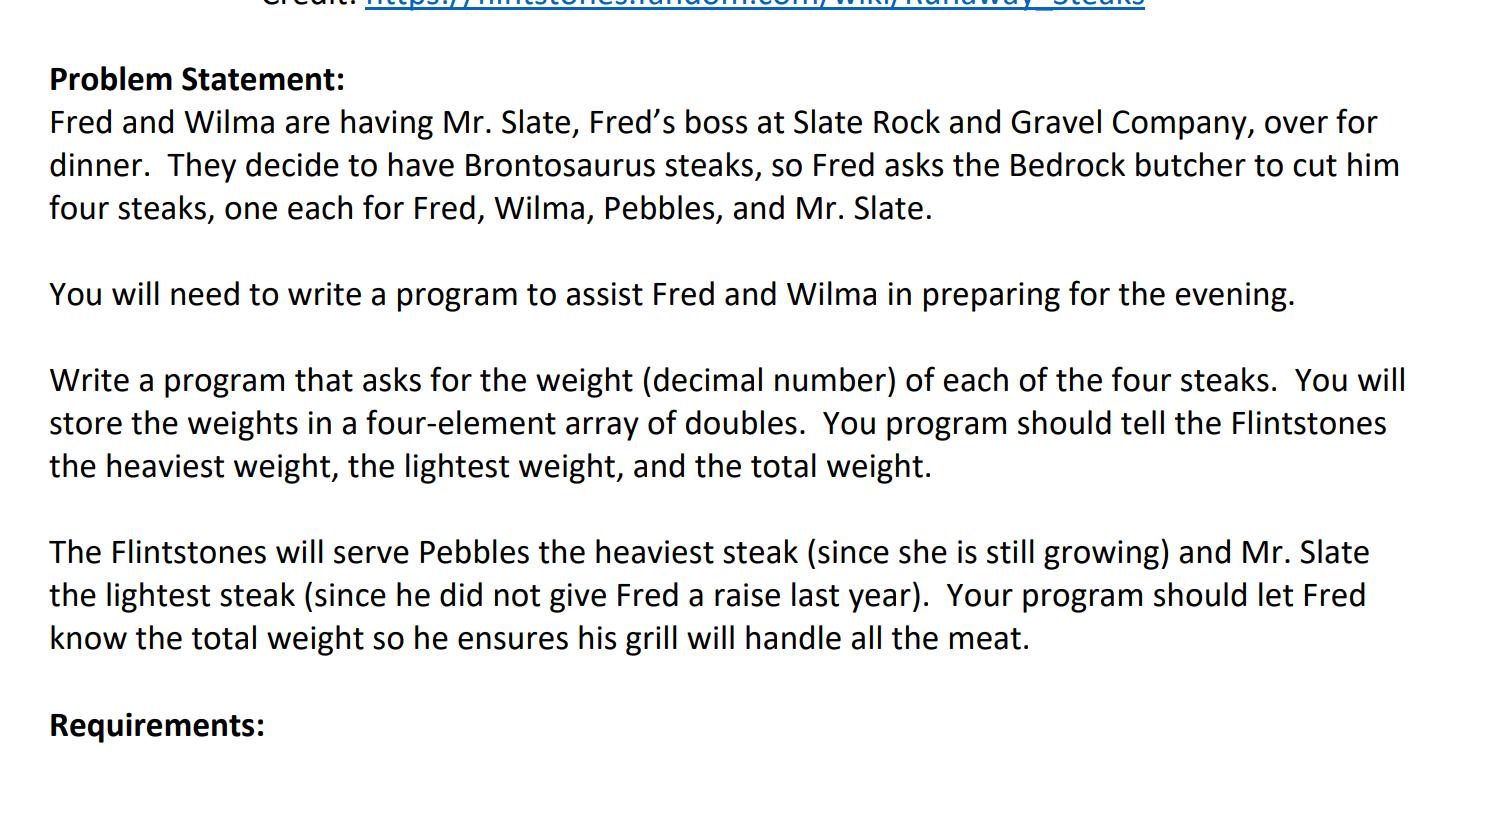 Problem Statement: Fred and Wilma are having Mr. Slate, Freds boss at Slate Rock and Gravel Company, over for dinner. They d